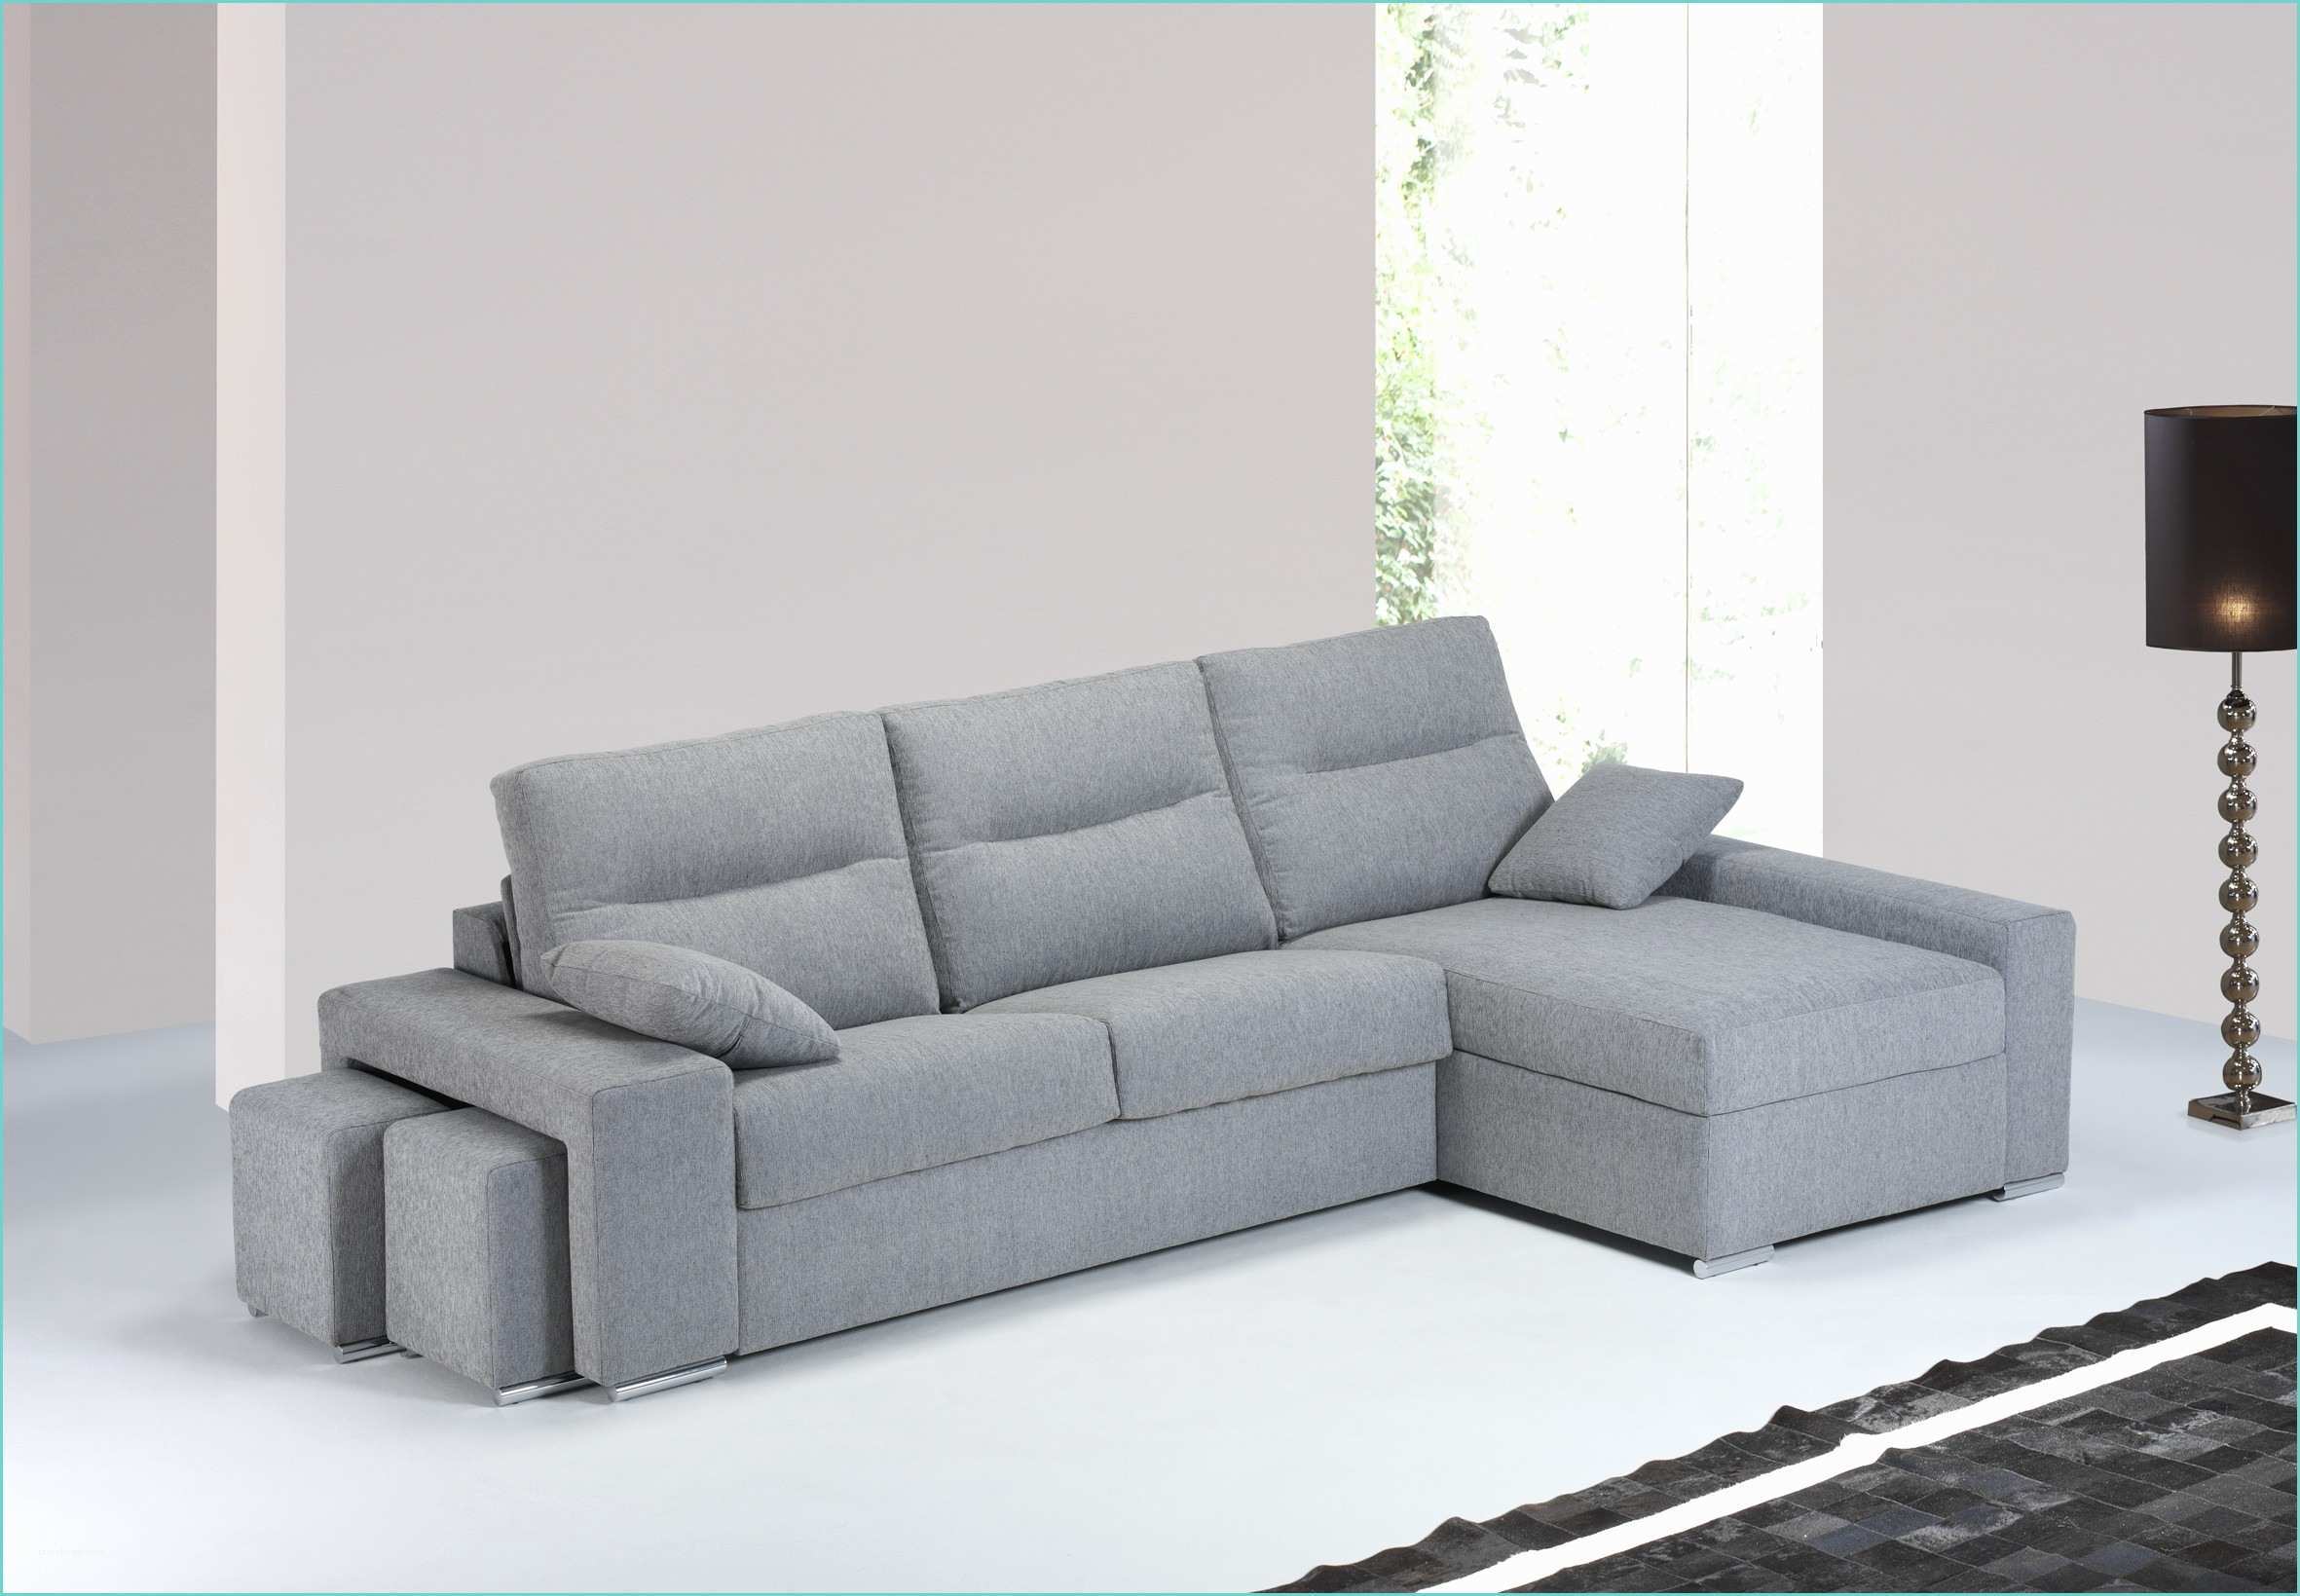 Canap 8 Places Convertible Canape Convertible Couchage Quoti N